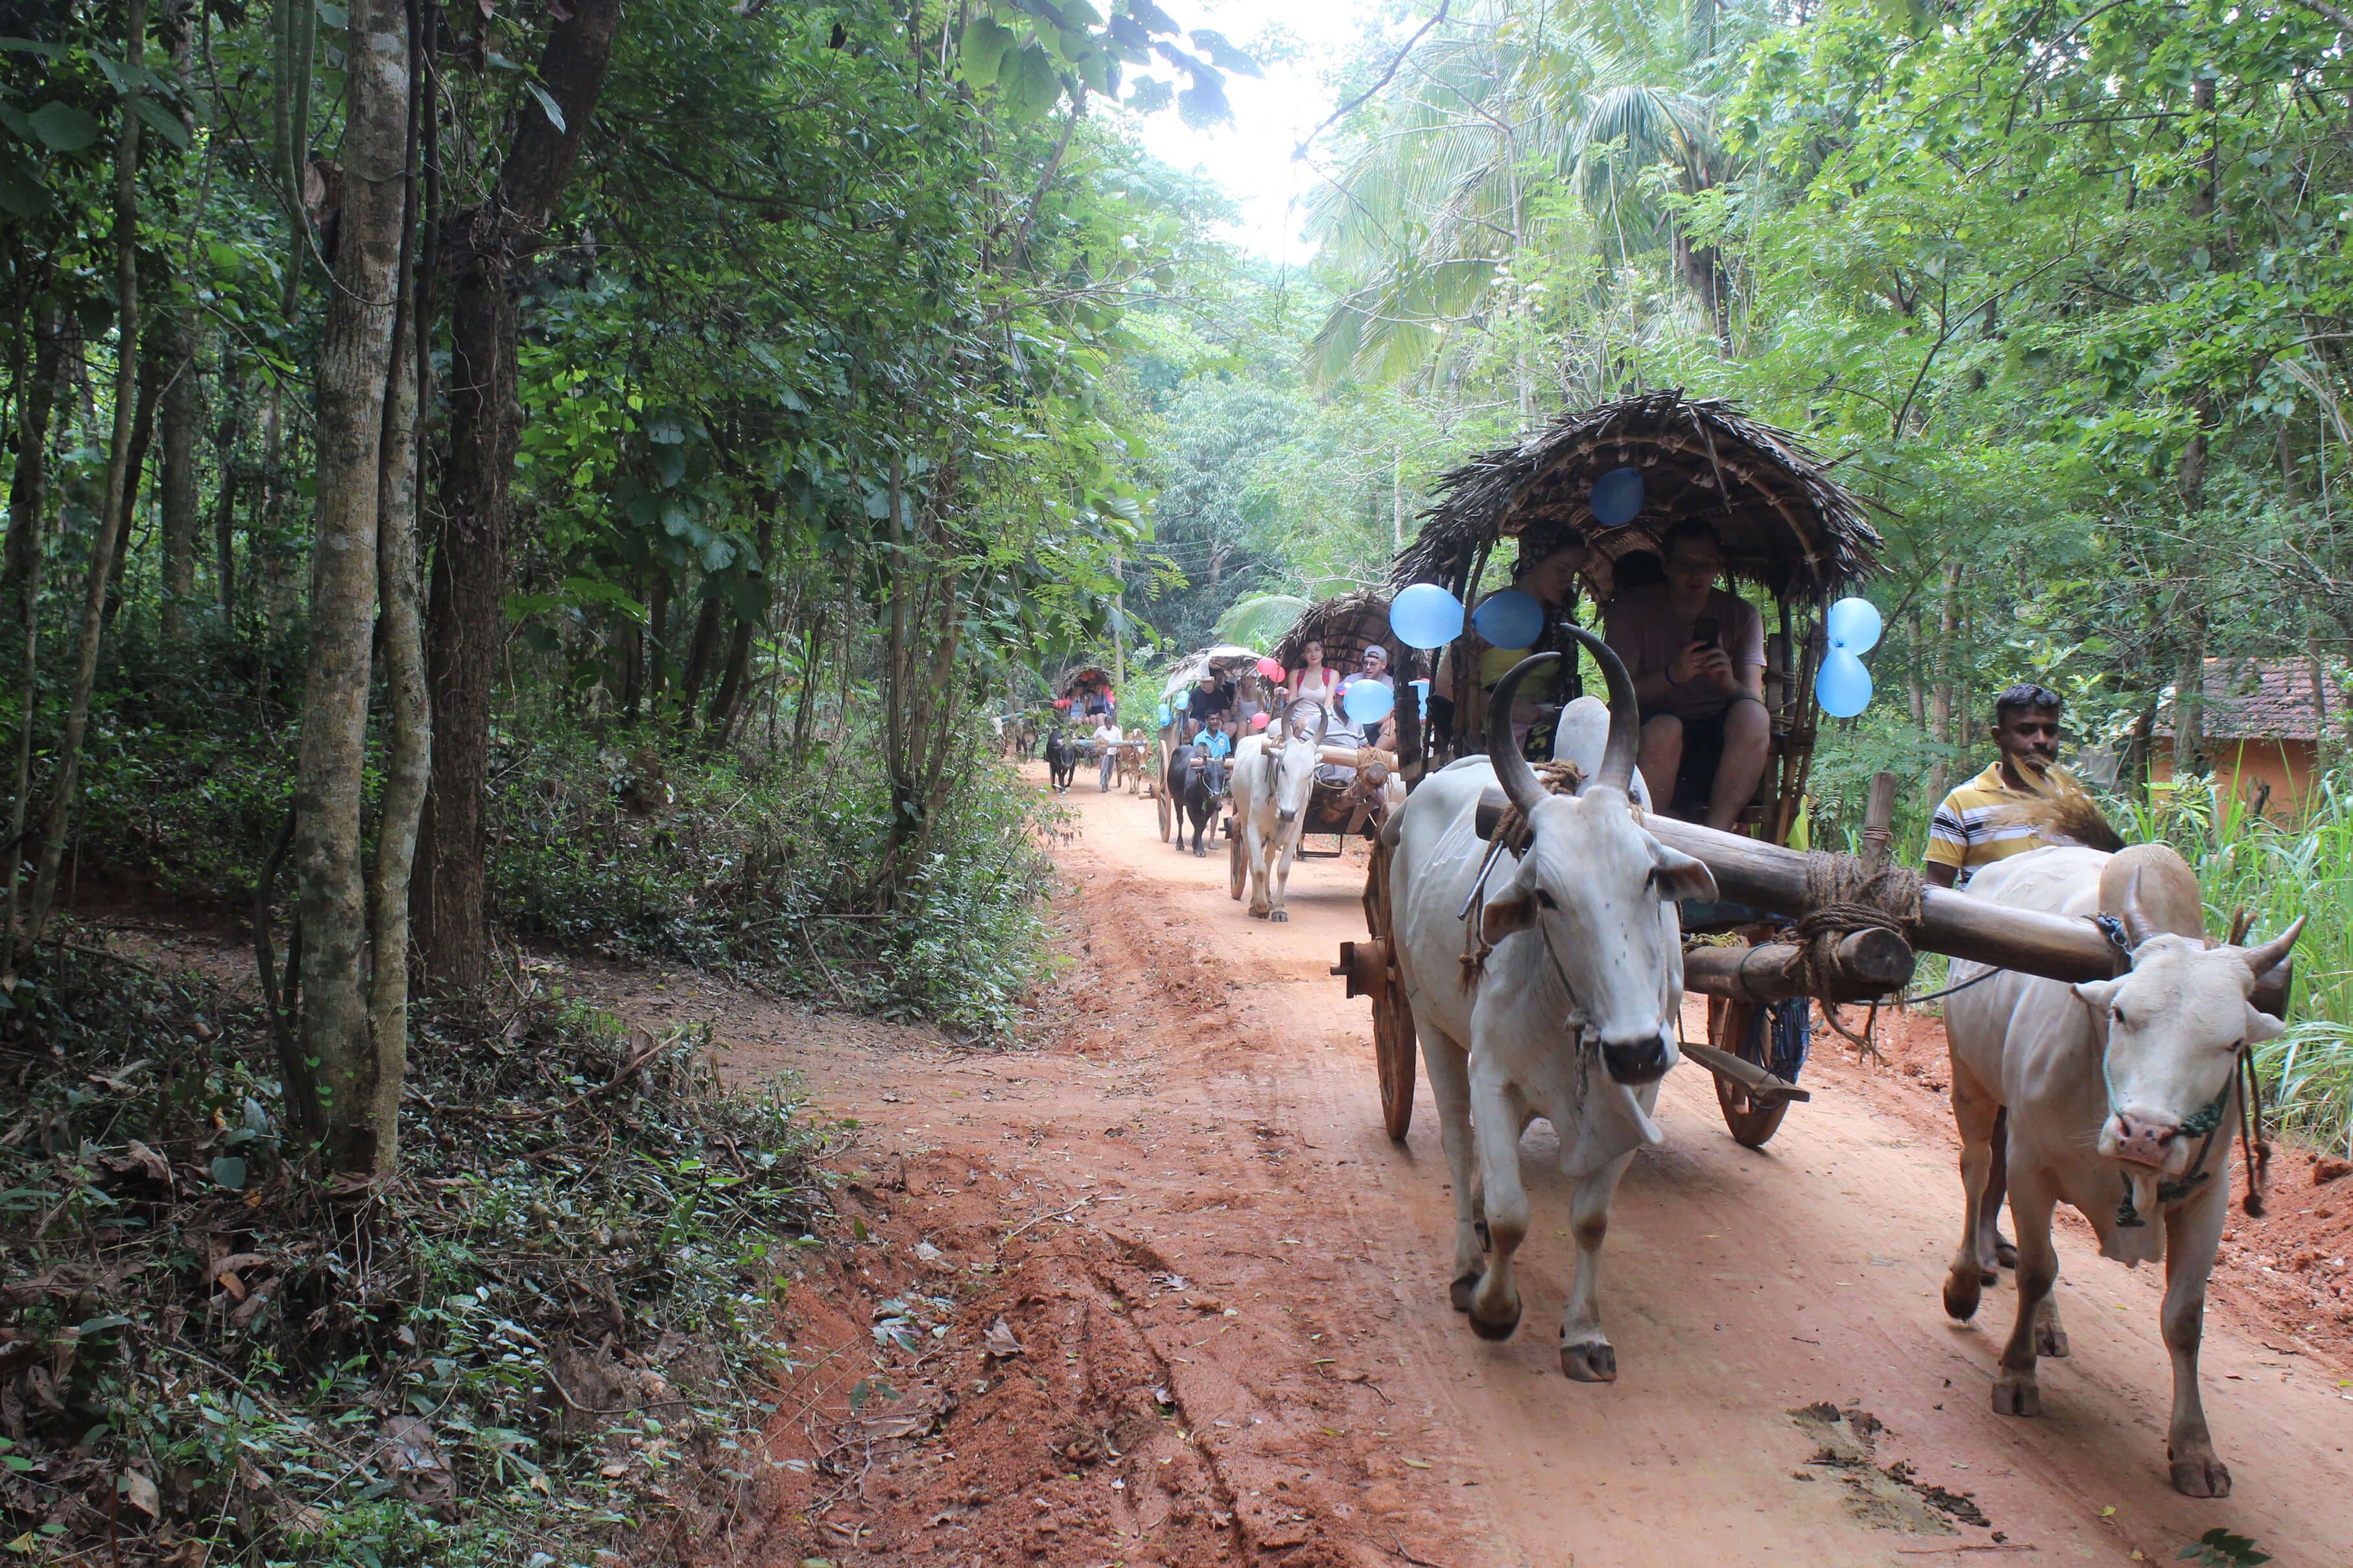 A group of people riding the local bullock cart.